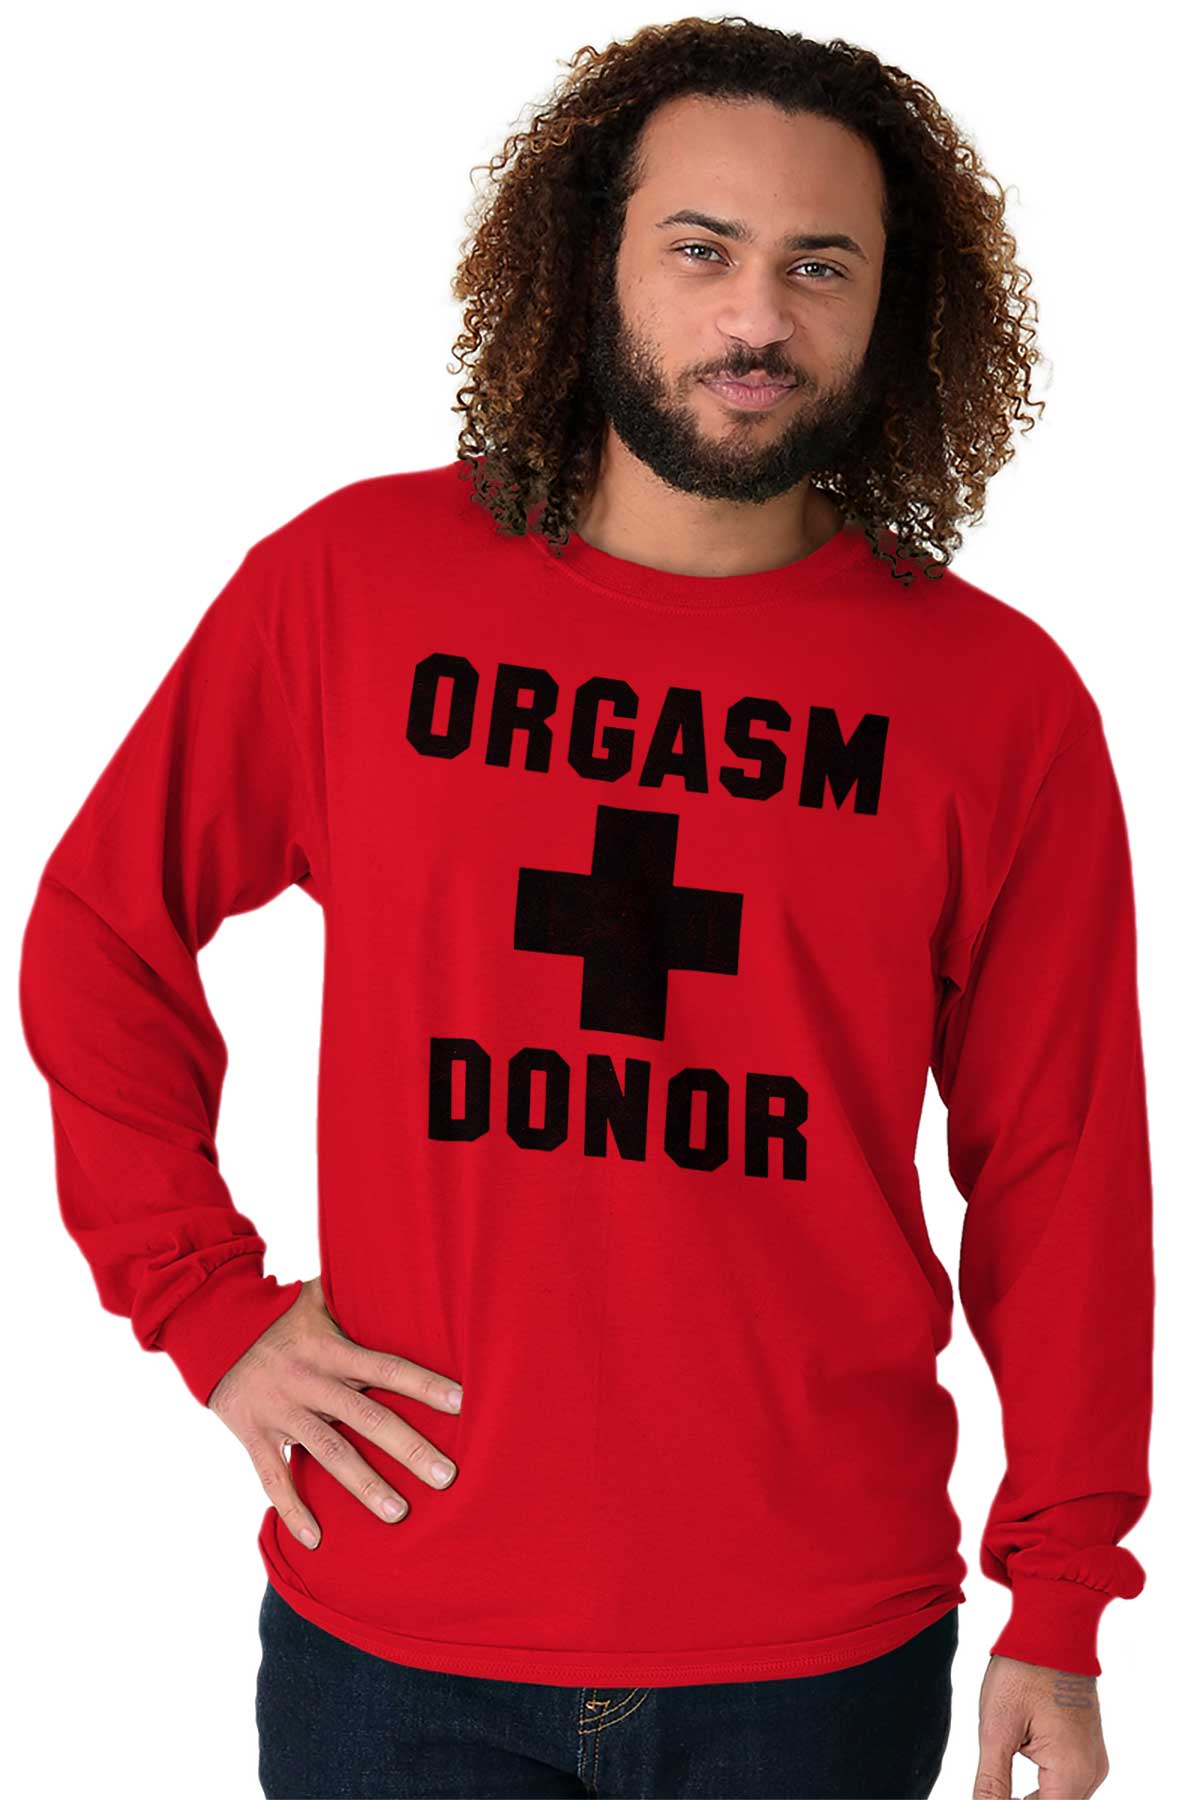 Orgasm Donor Funny Lifeguard Novelty T Long Sleeve Tshirt Tee For